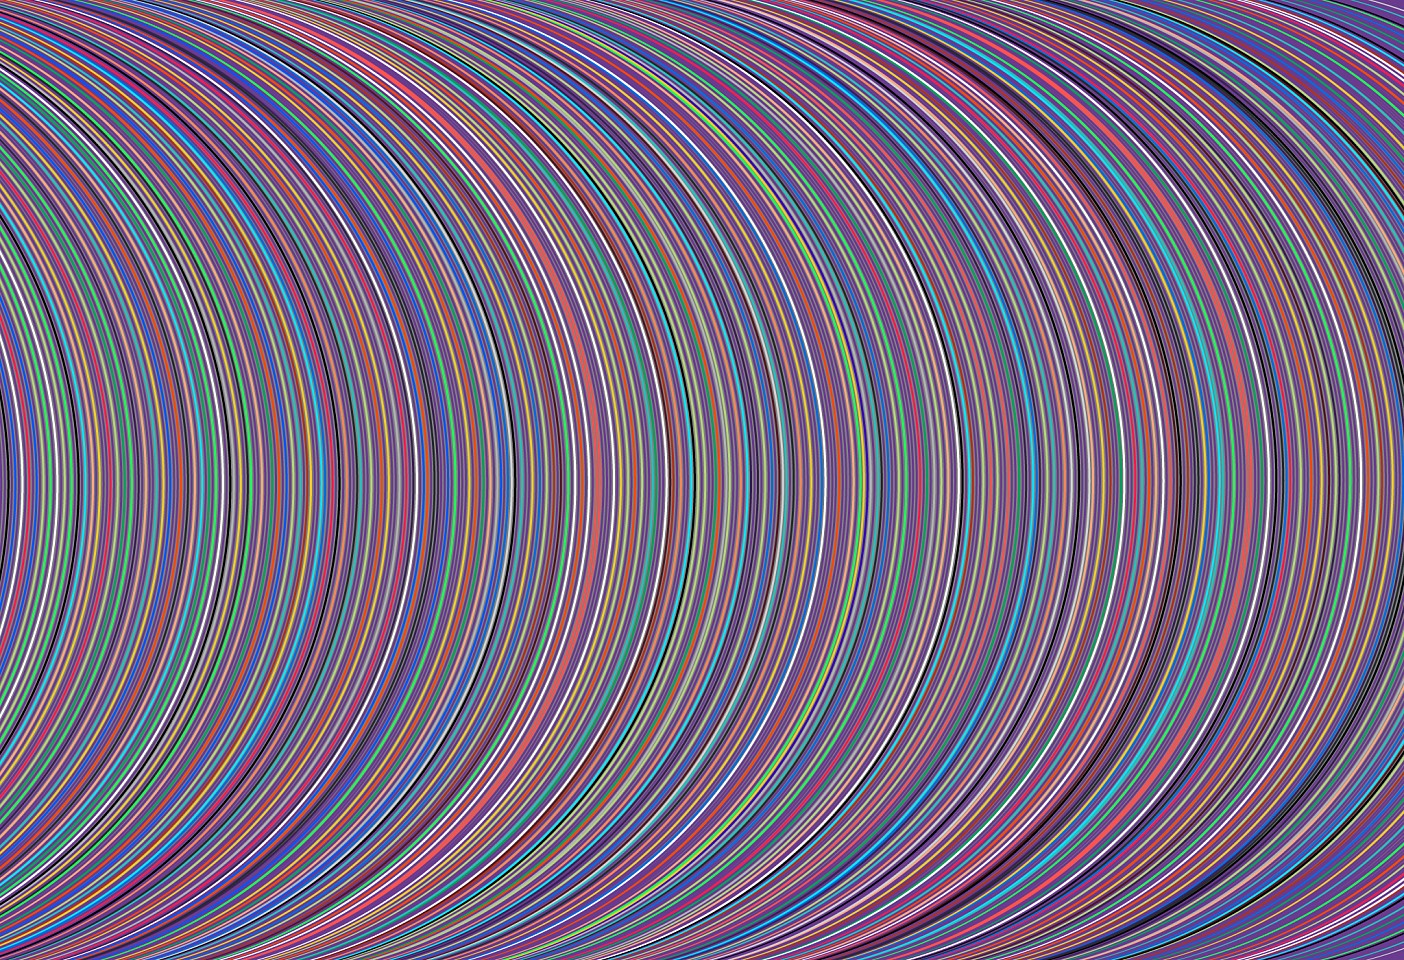 Dane Albert, Arcs #9 Dusk, 2023
Acrylic on canvas (Concept), 48 x 72 in. (121.9 x 182.9 cm)
Series of colored lines and shapes in multiple configurations
DA.2023.arcs-009-dusk